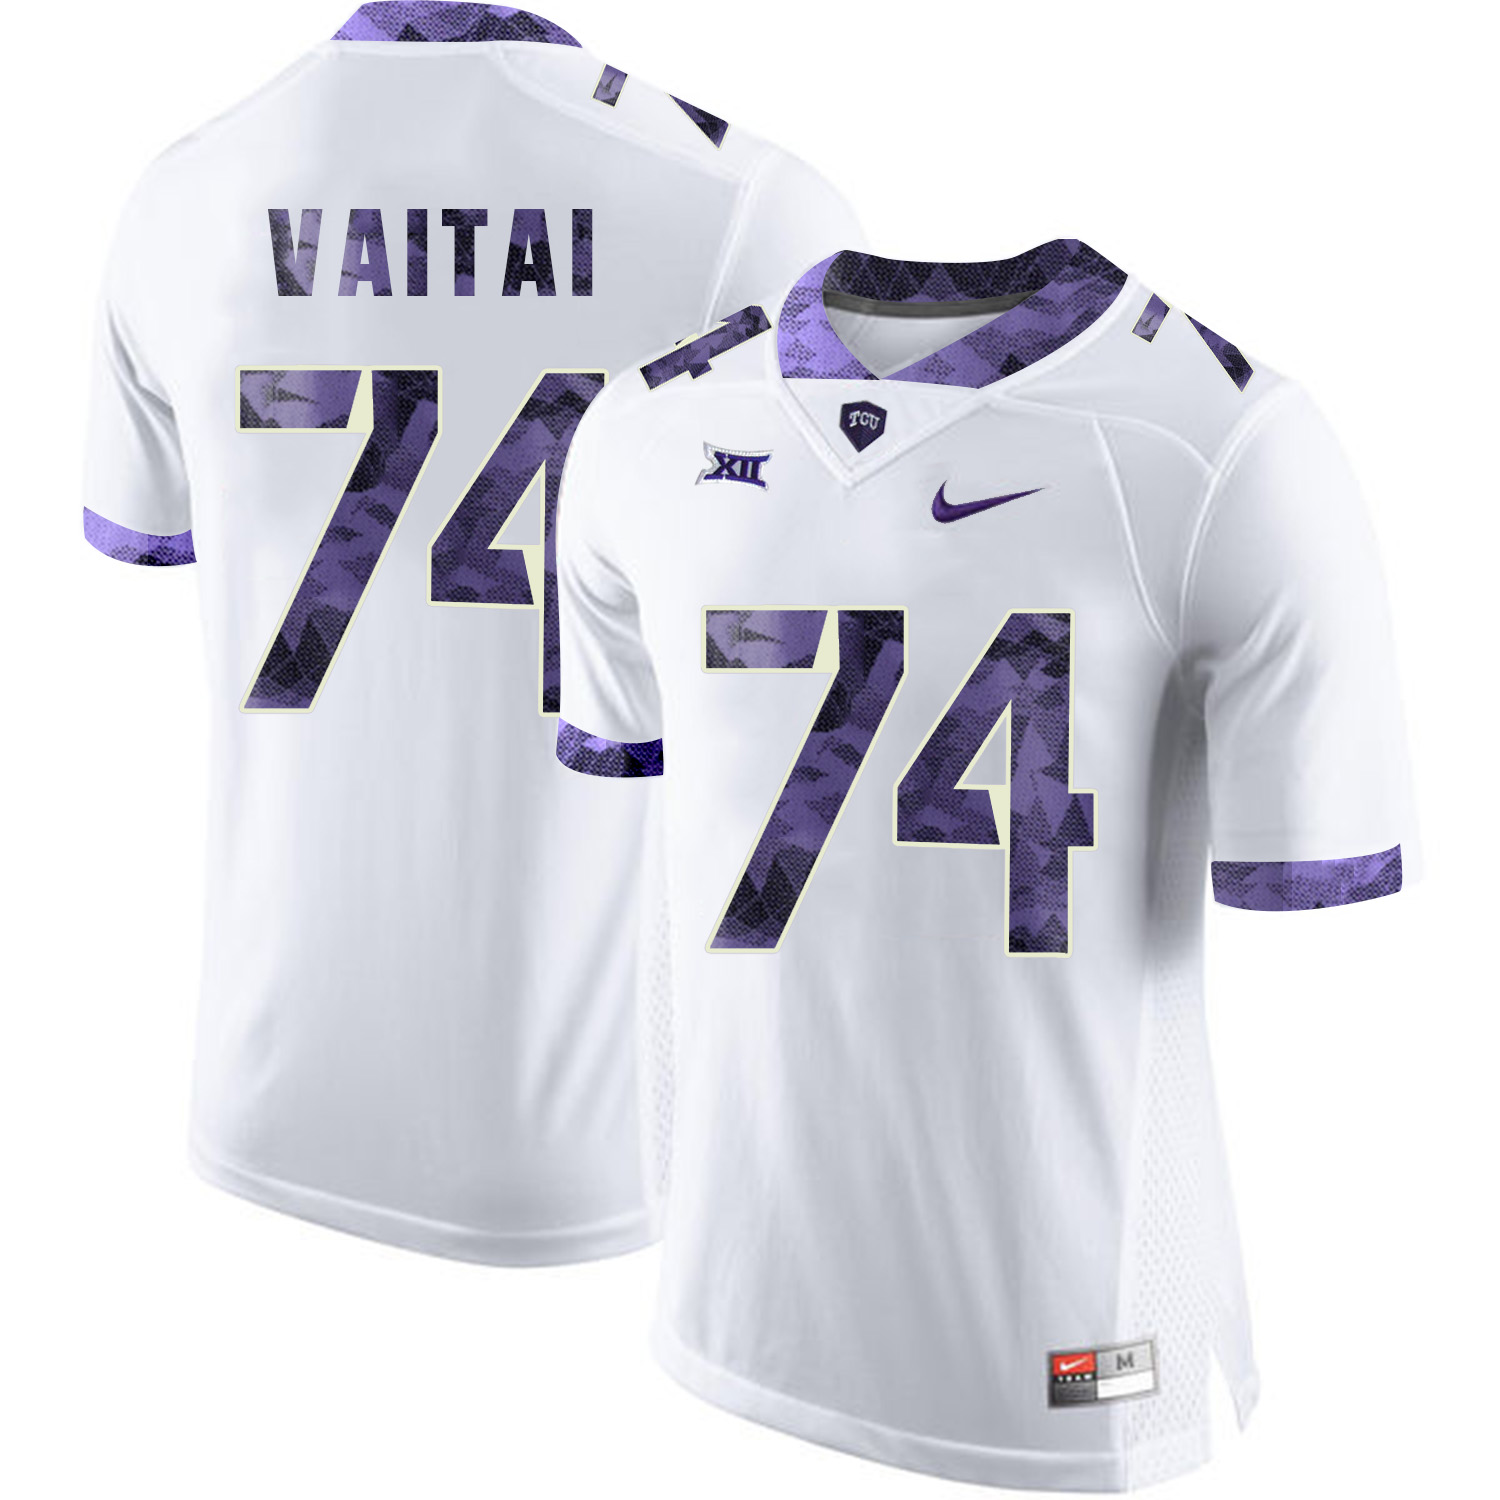 TCU Horned Frogs 74 Halapoulivaati Vaitai White Print College Football Limited Jersey2